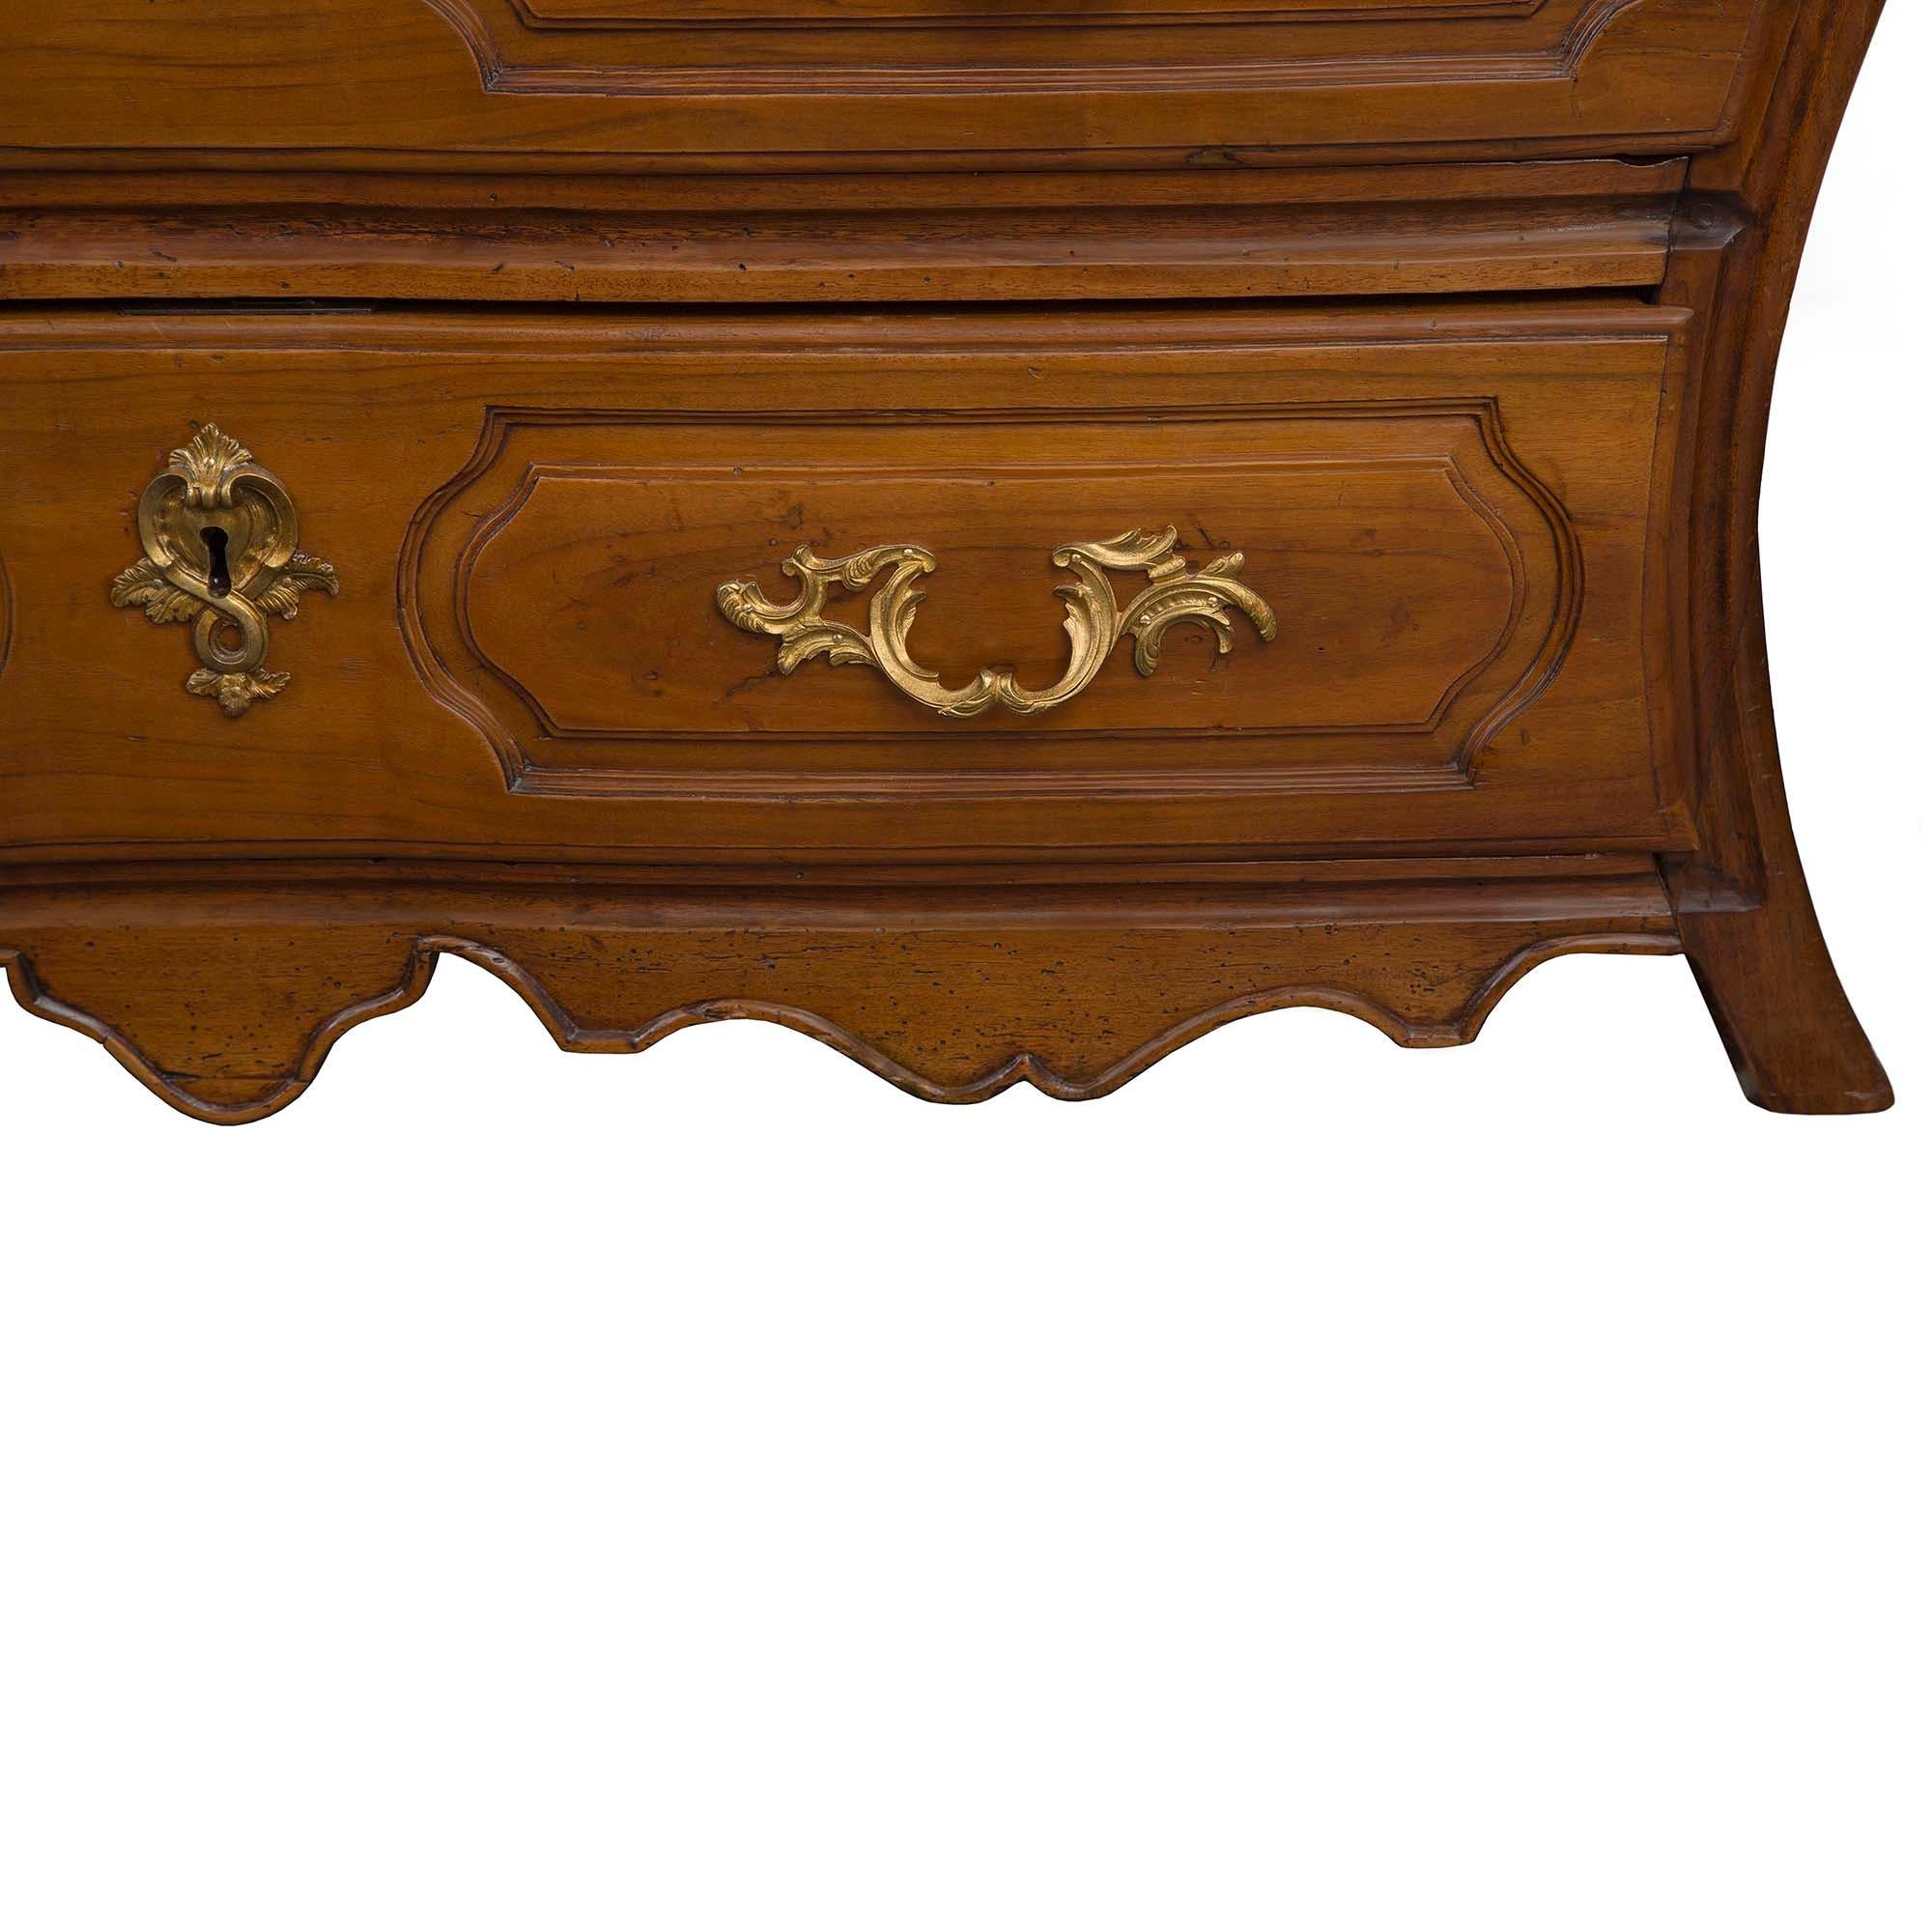 French 18th Century Louis XV Period Walnut and Ormolu Three-Drawer Commode For Sale 1